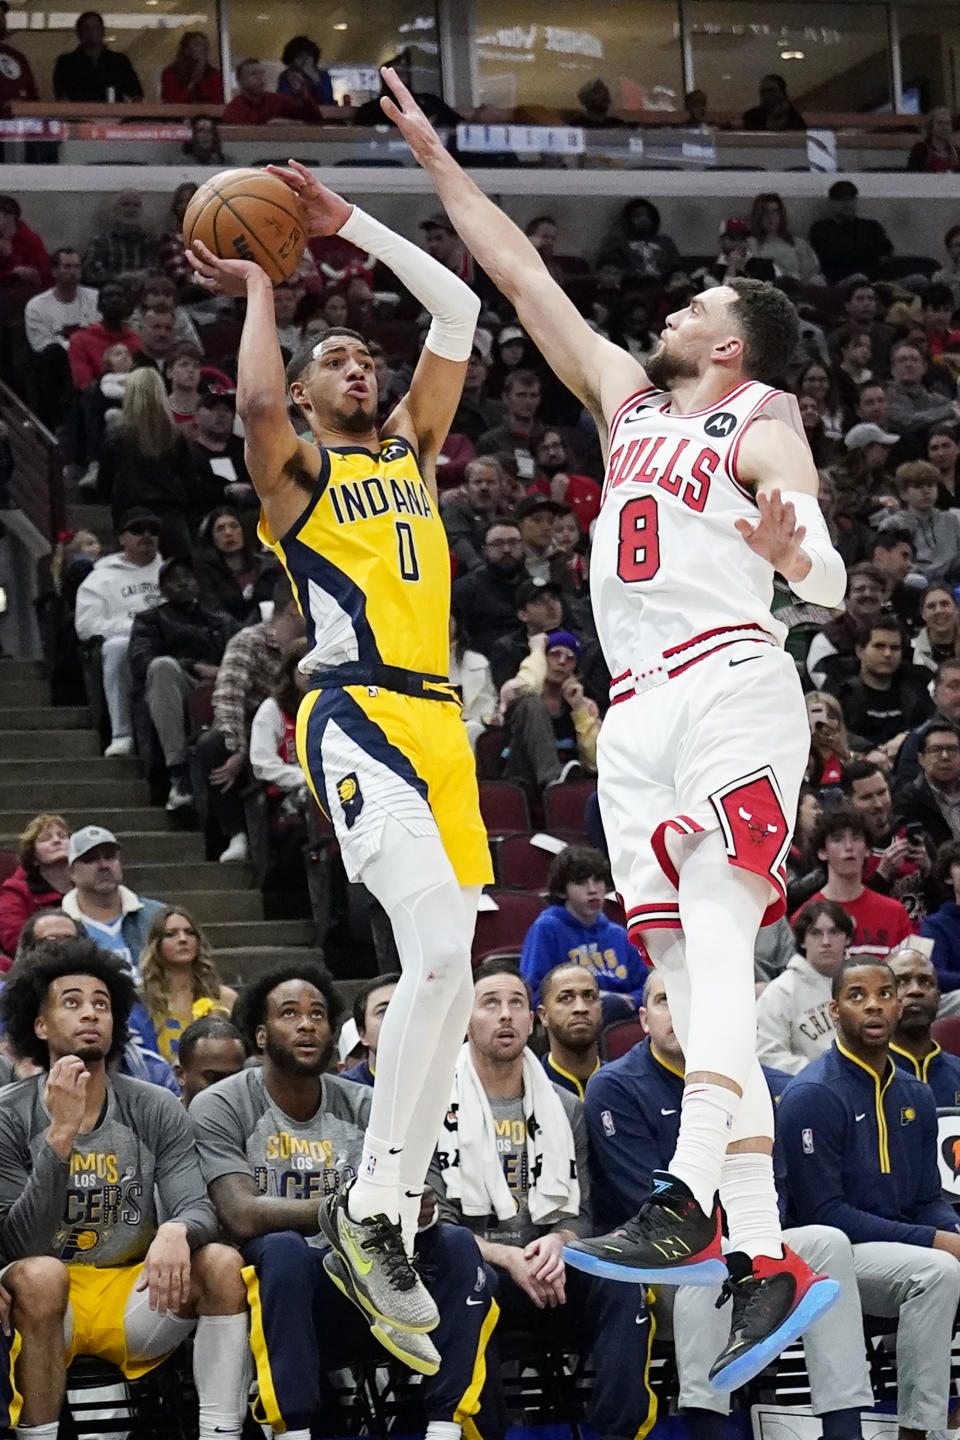 Indiana Pacers guard Tyrese Haliburton, left, shoots against Chicago Bulls guard Zach LaVine during the first half of an NBA basketball game in Chicago, Sunday, March 5, 2023. (AP Photo/Nam Y. Huh)